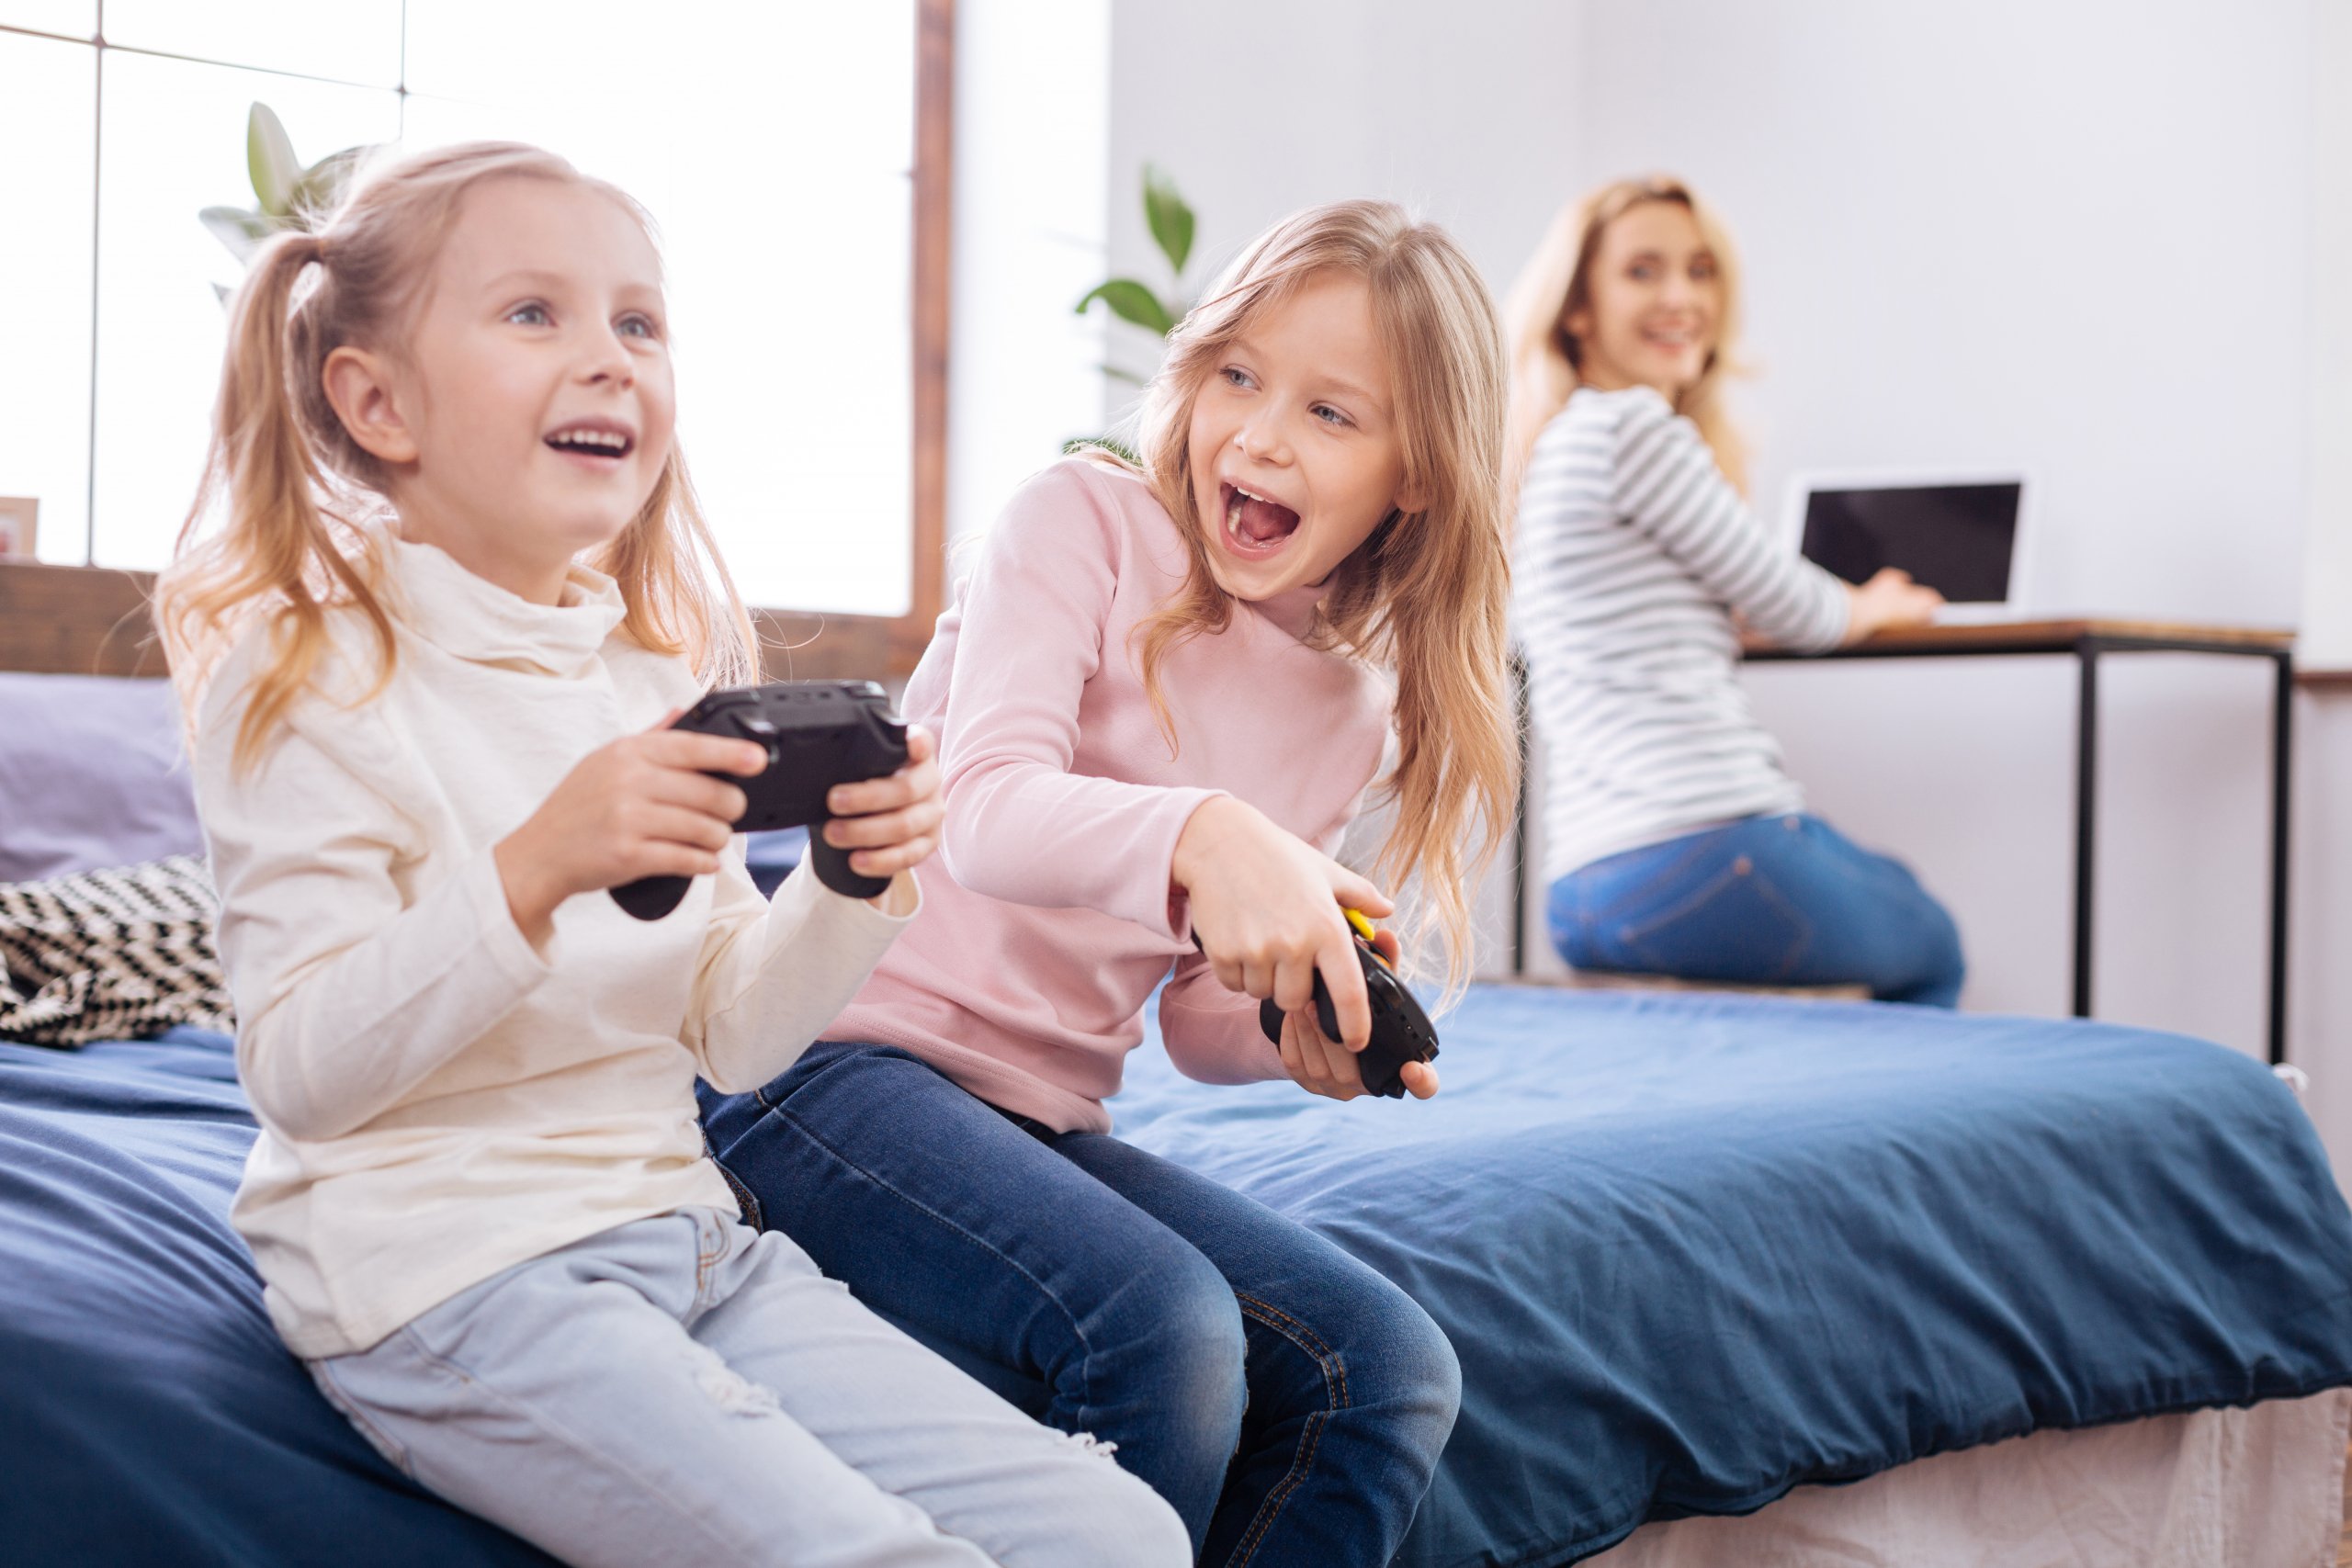 Younger kids may need more video game rules